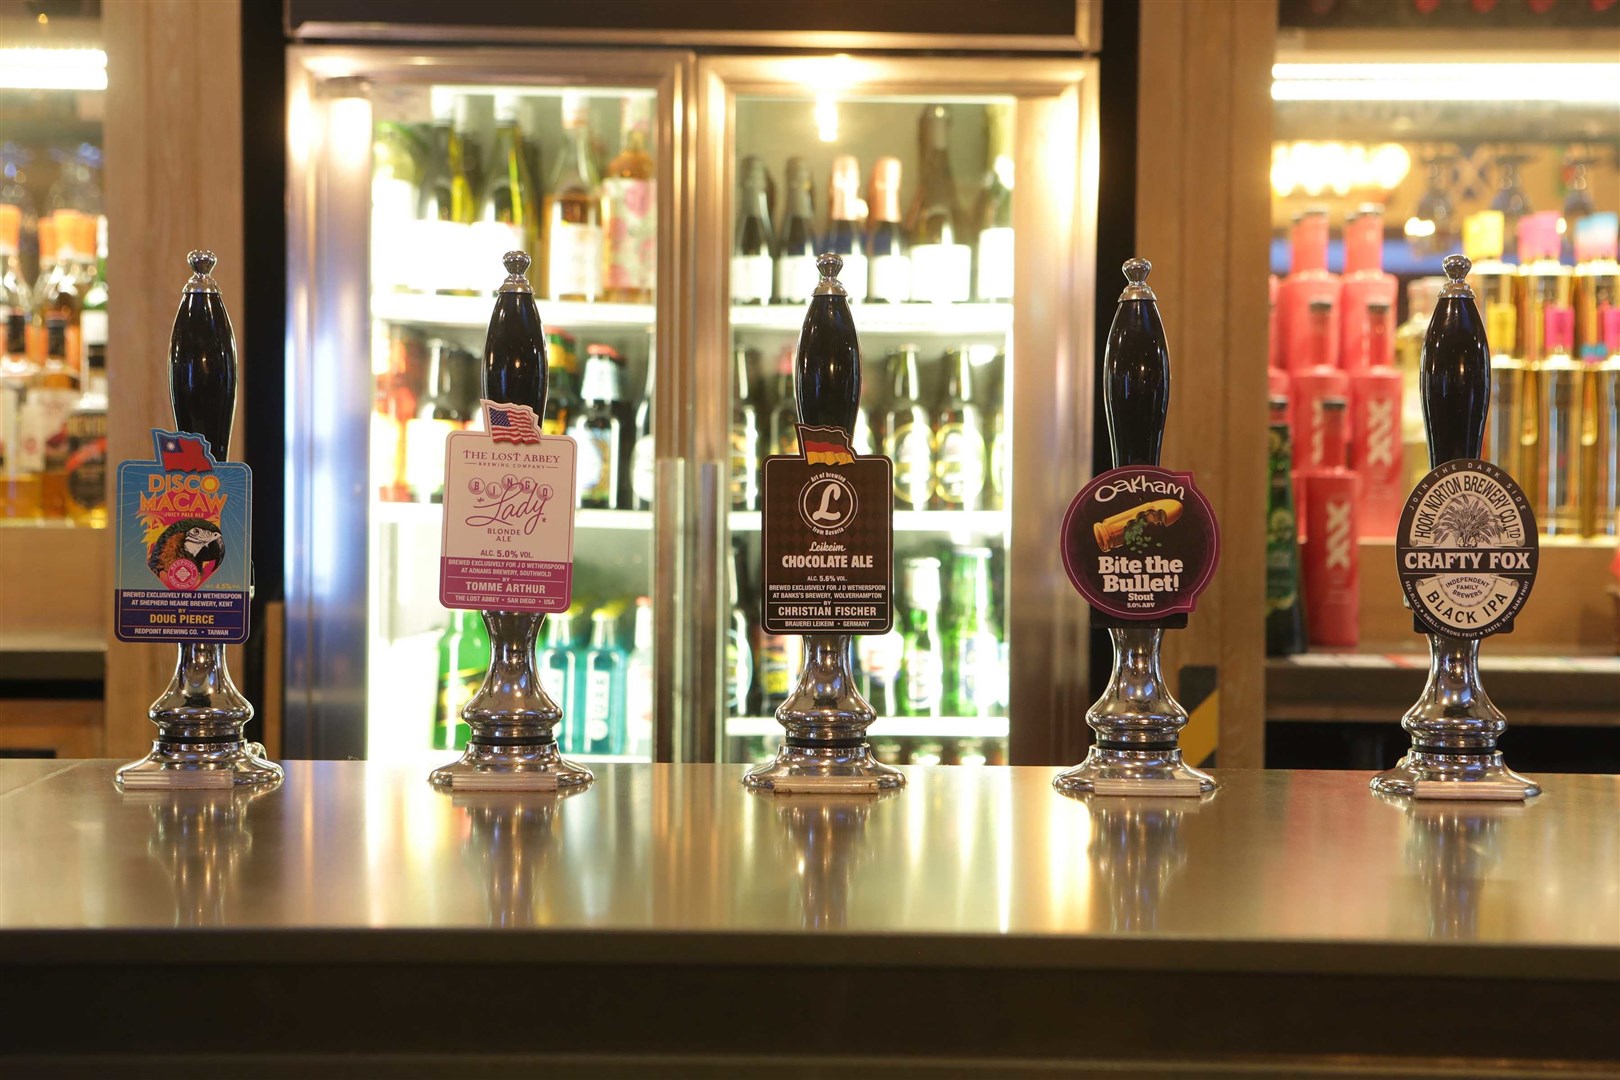 The pub will serve a number of beers brewed specifically for the festival.